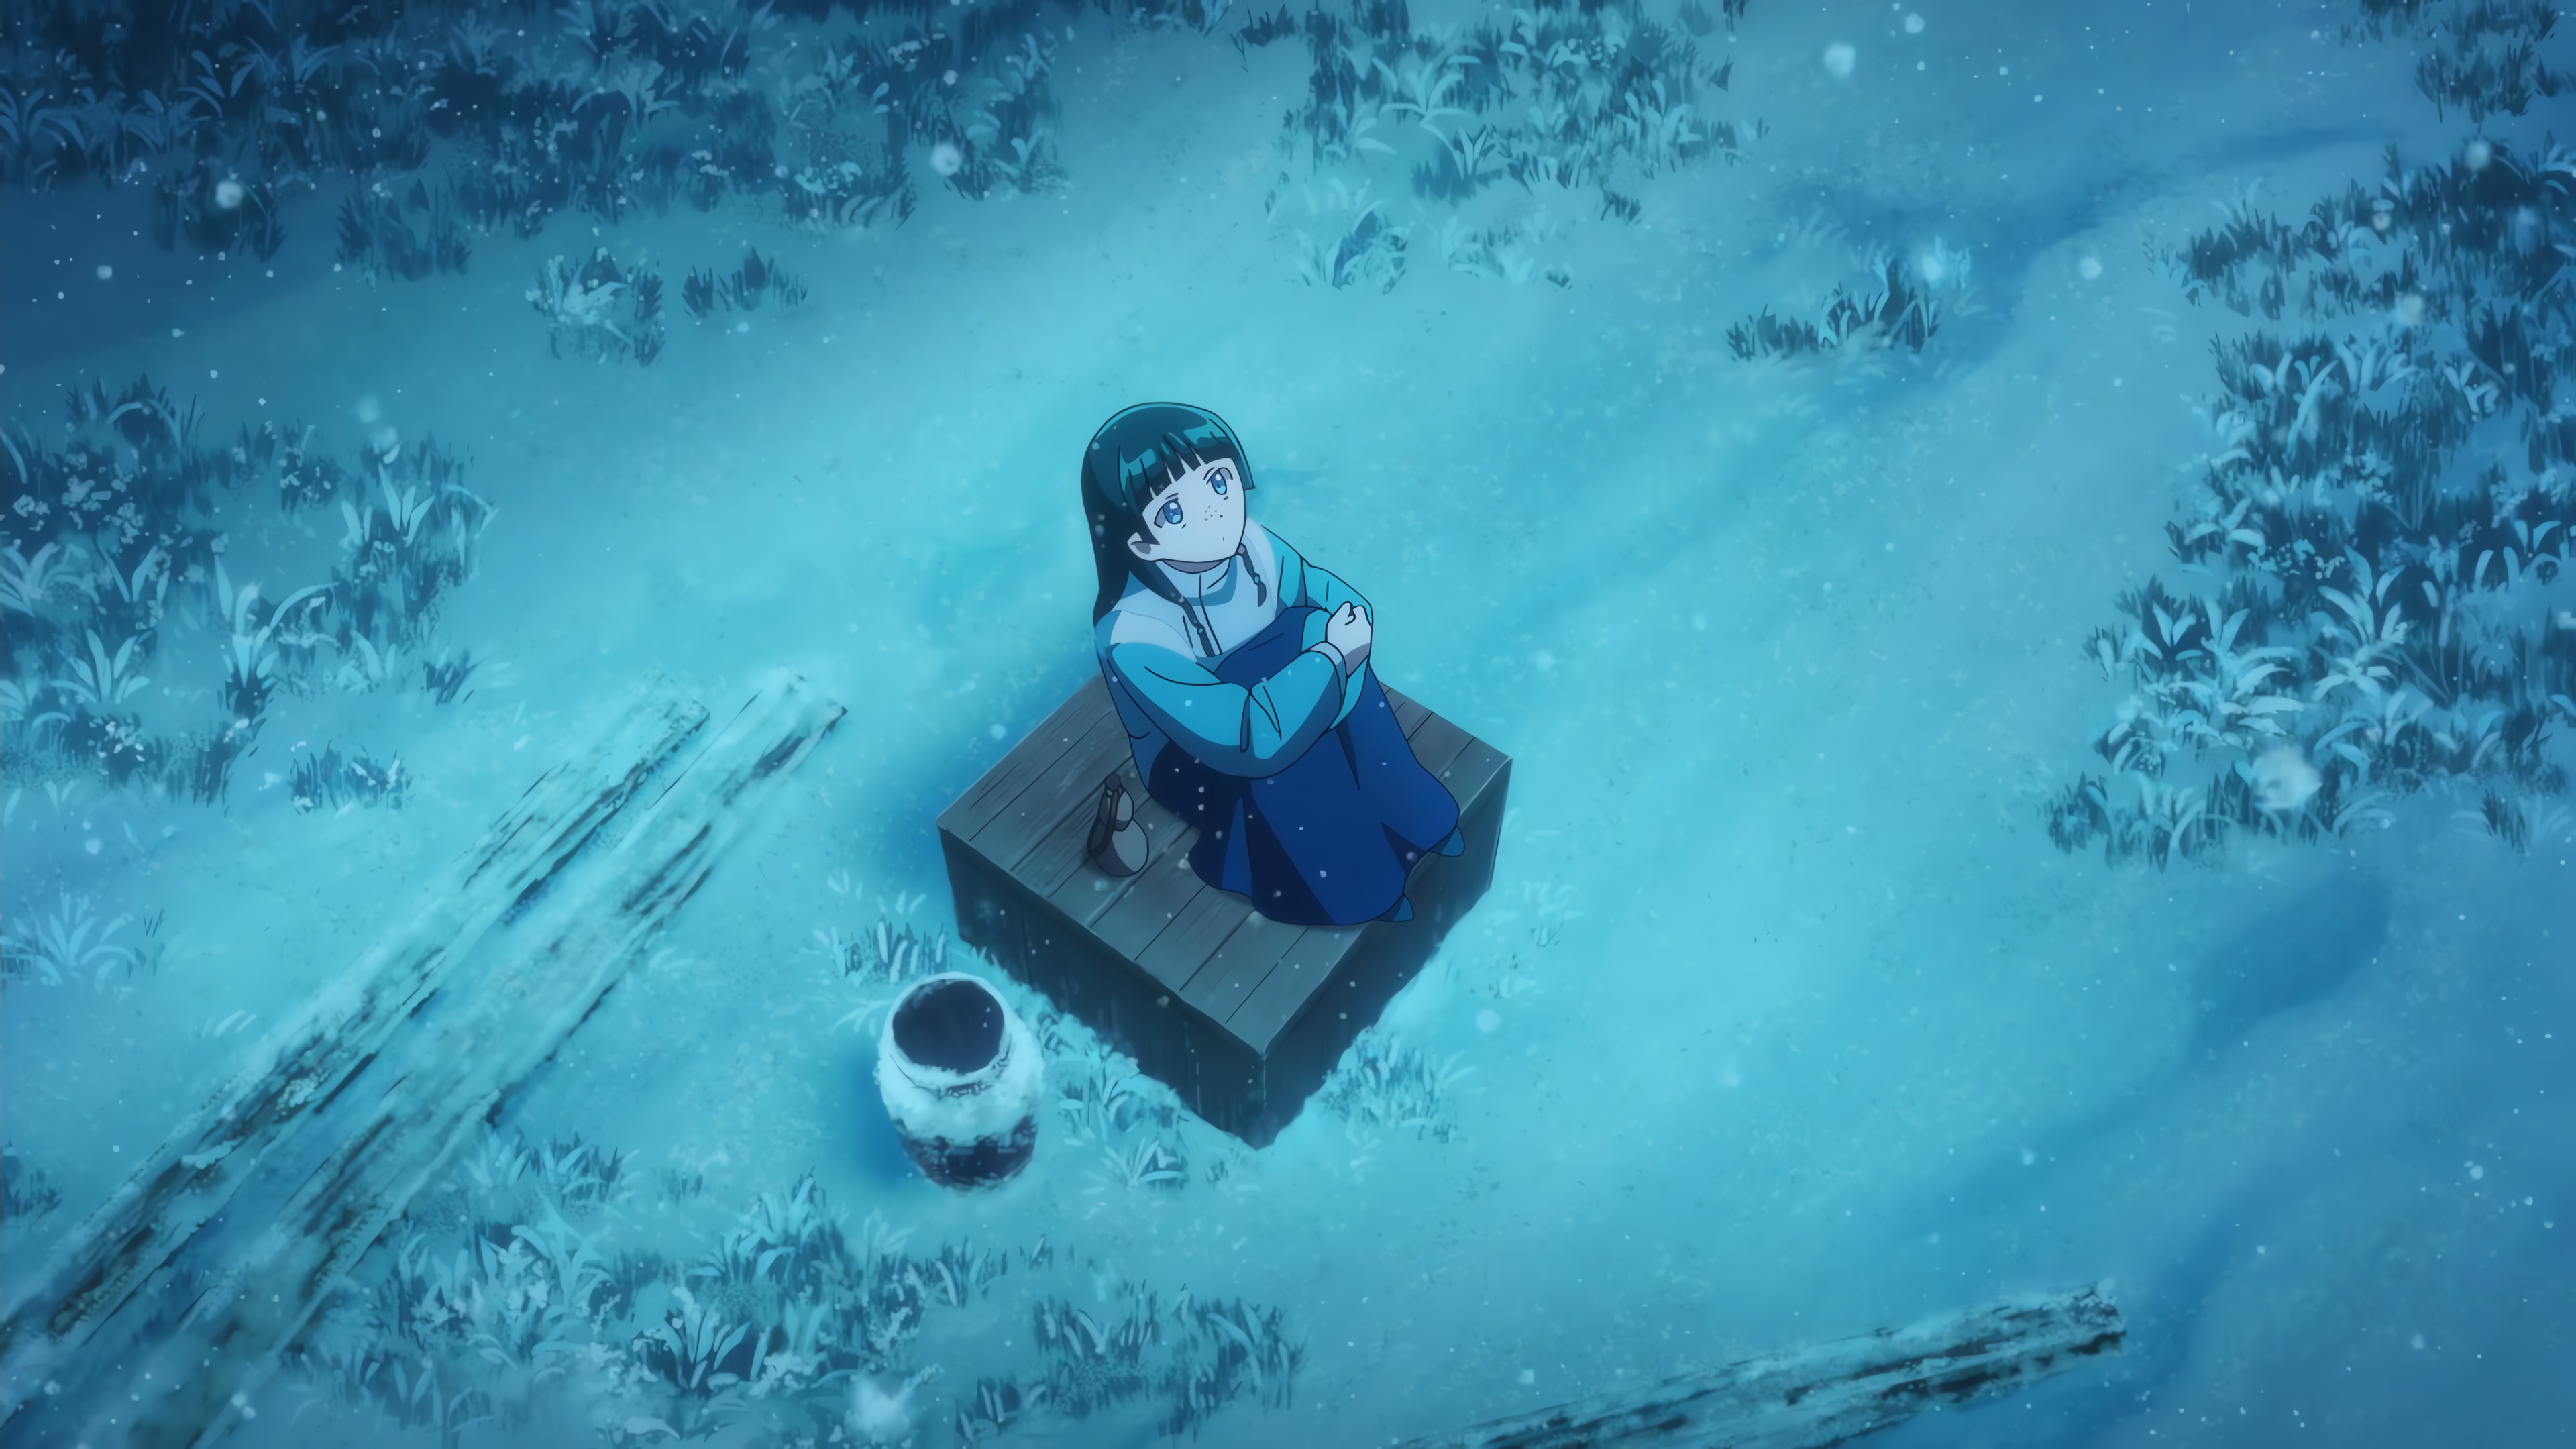 Anime 3840x2160 snow anime girls anime winter clothing The Apothecary Diaries green hair night Anime screenshot sitting outdoors women outdoors looking up holding knees blunt bangs long hair bangs blue eyes